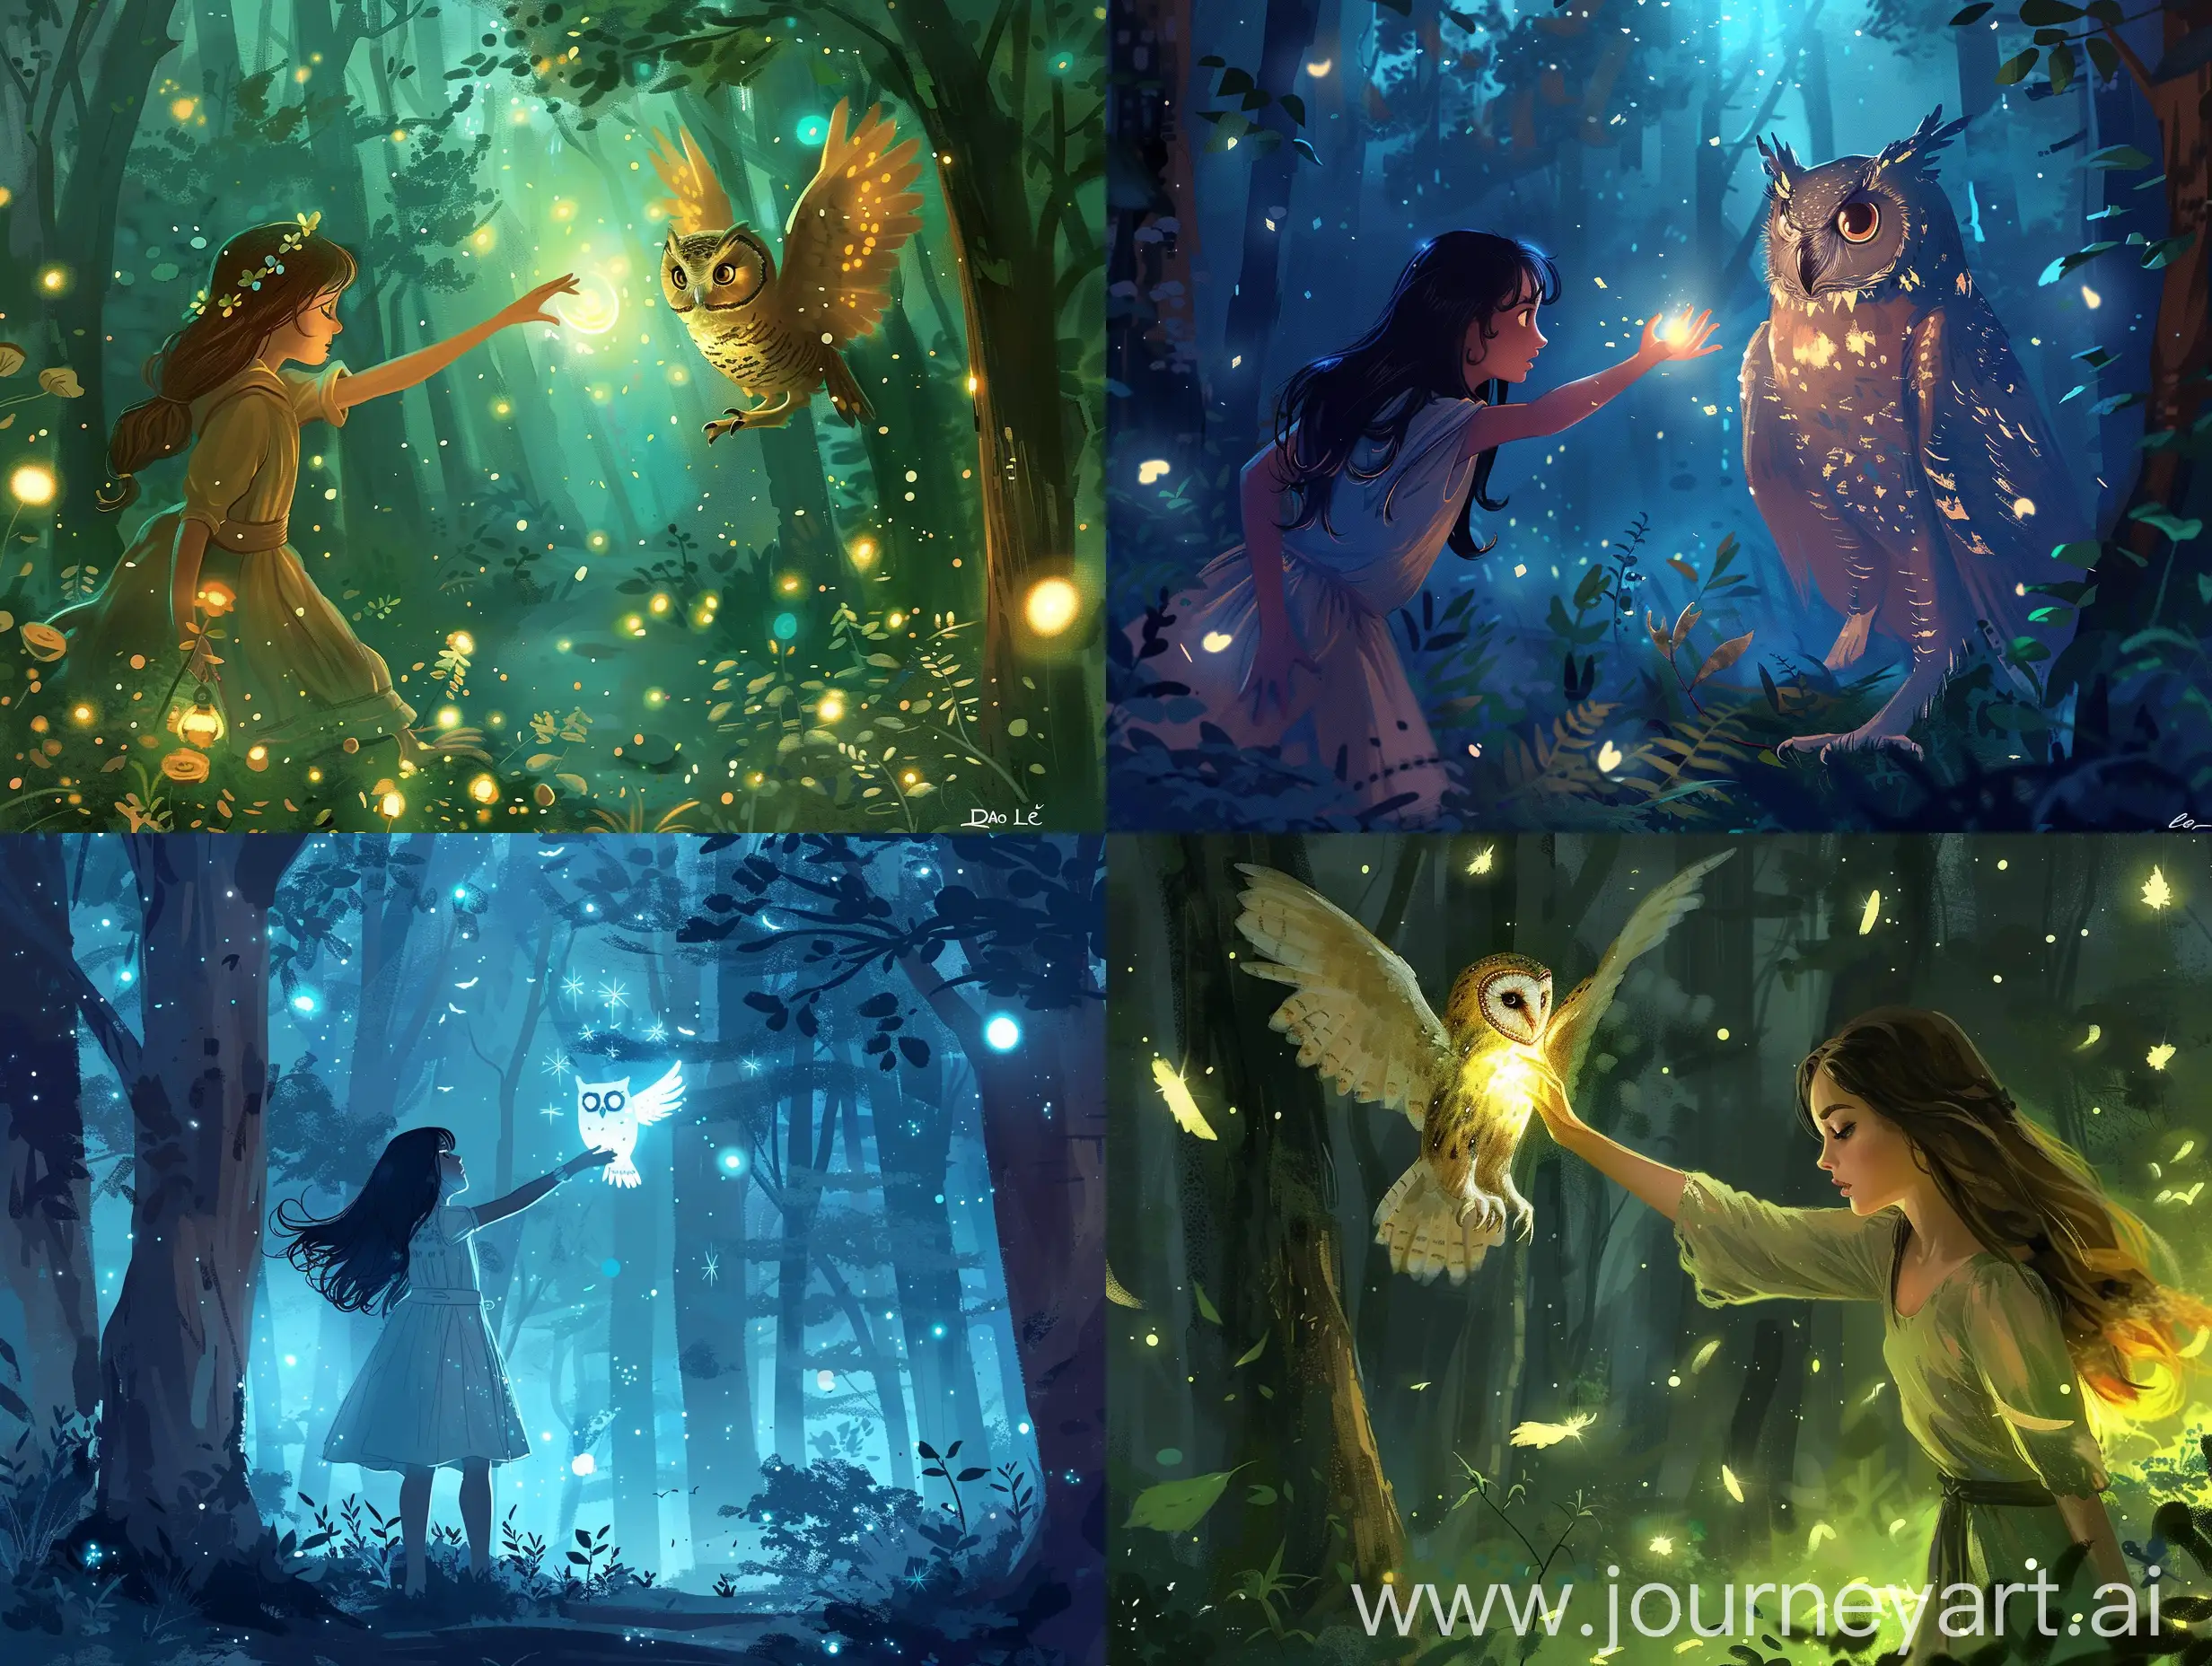 Night forest scene Princess Mage girl reaching to touch glowing owl Dao Le style drawing